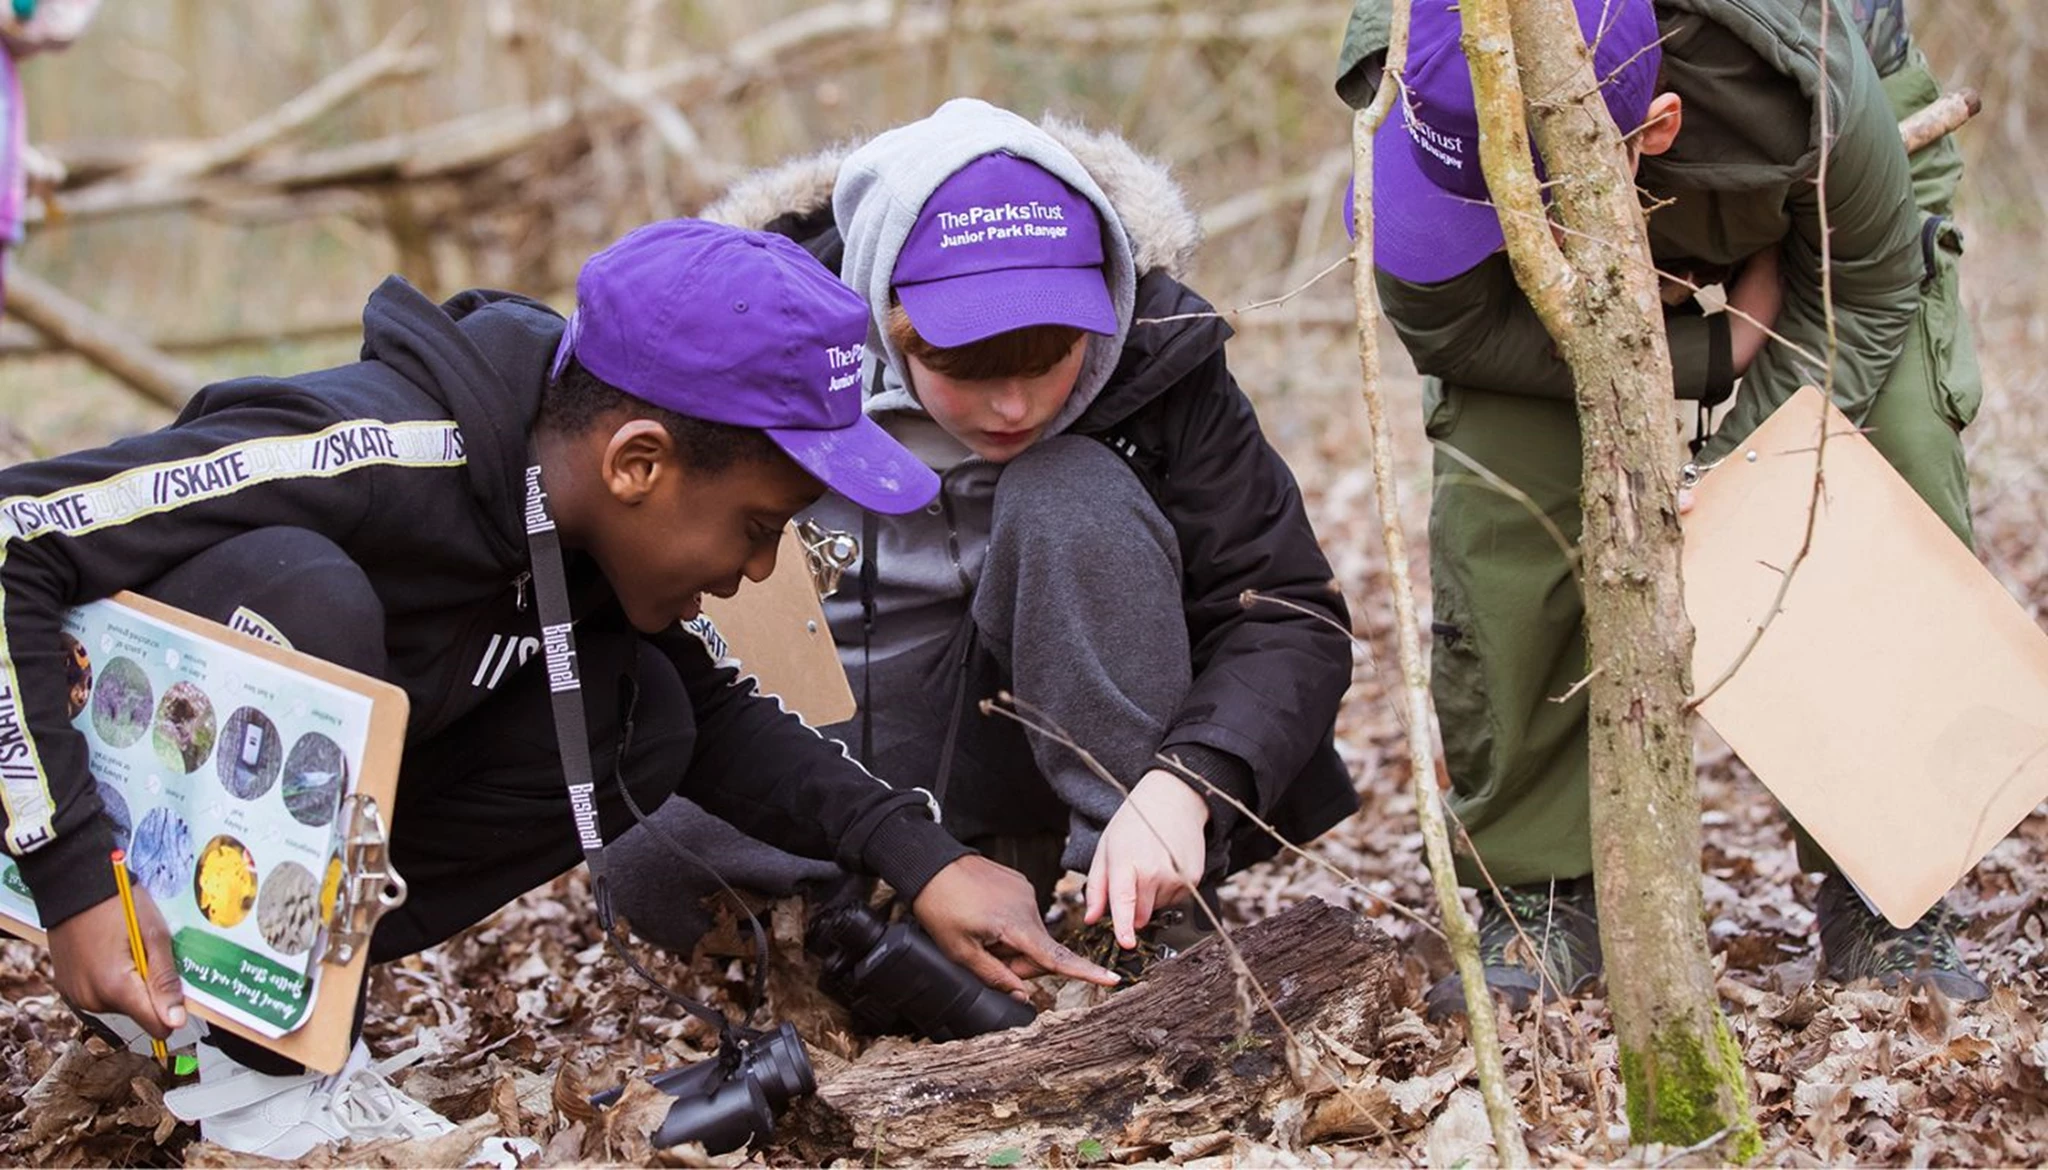 A group of JPRs in purple caps is crouched down looking carefully at a log habitat. They have binoculars round their necks..jpg